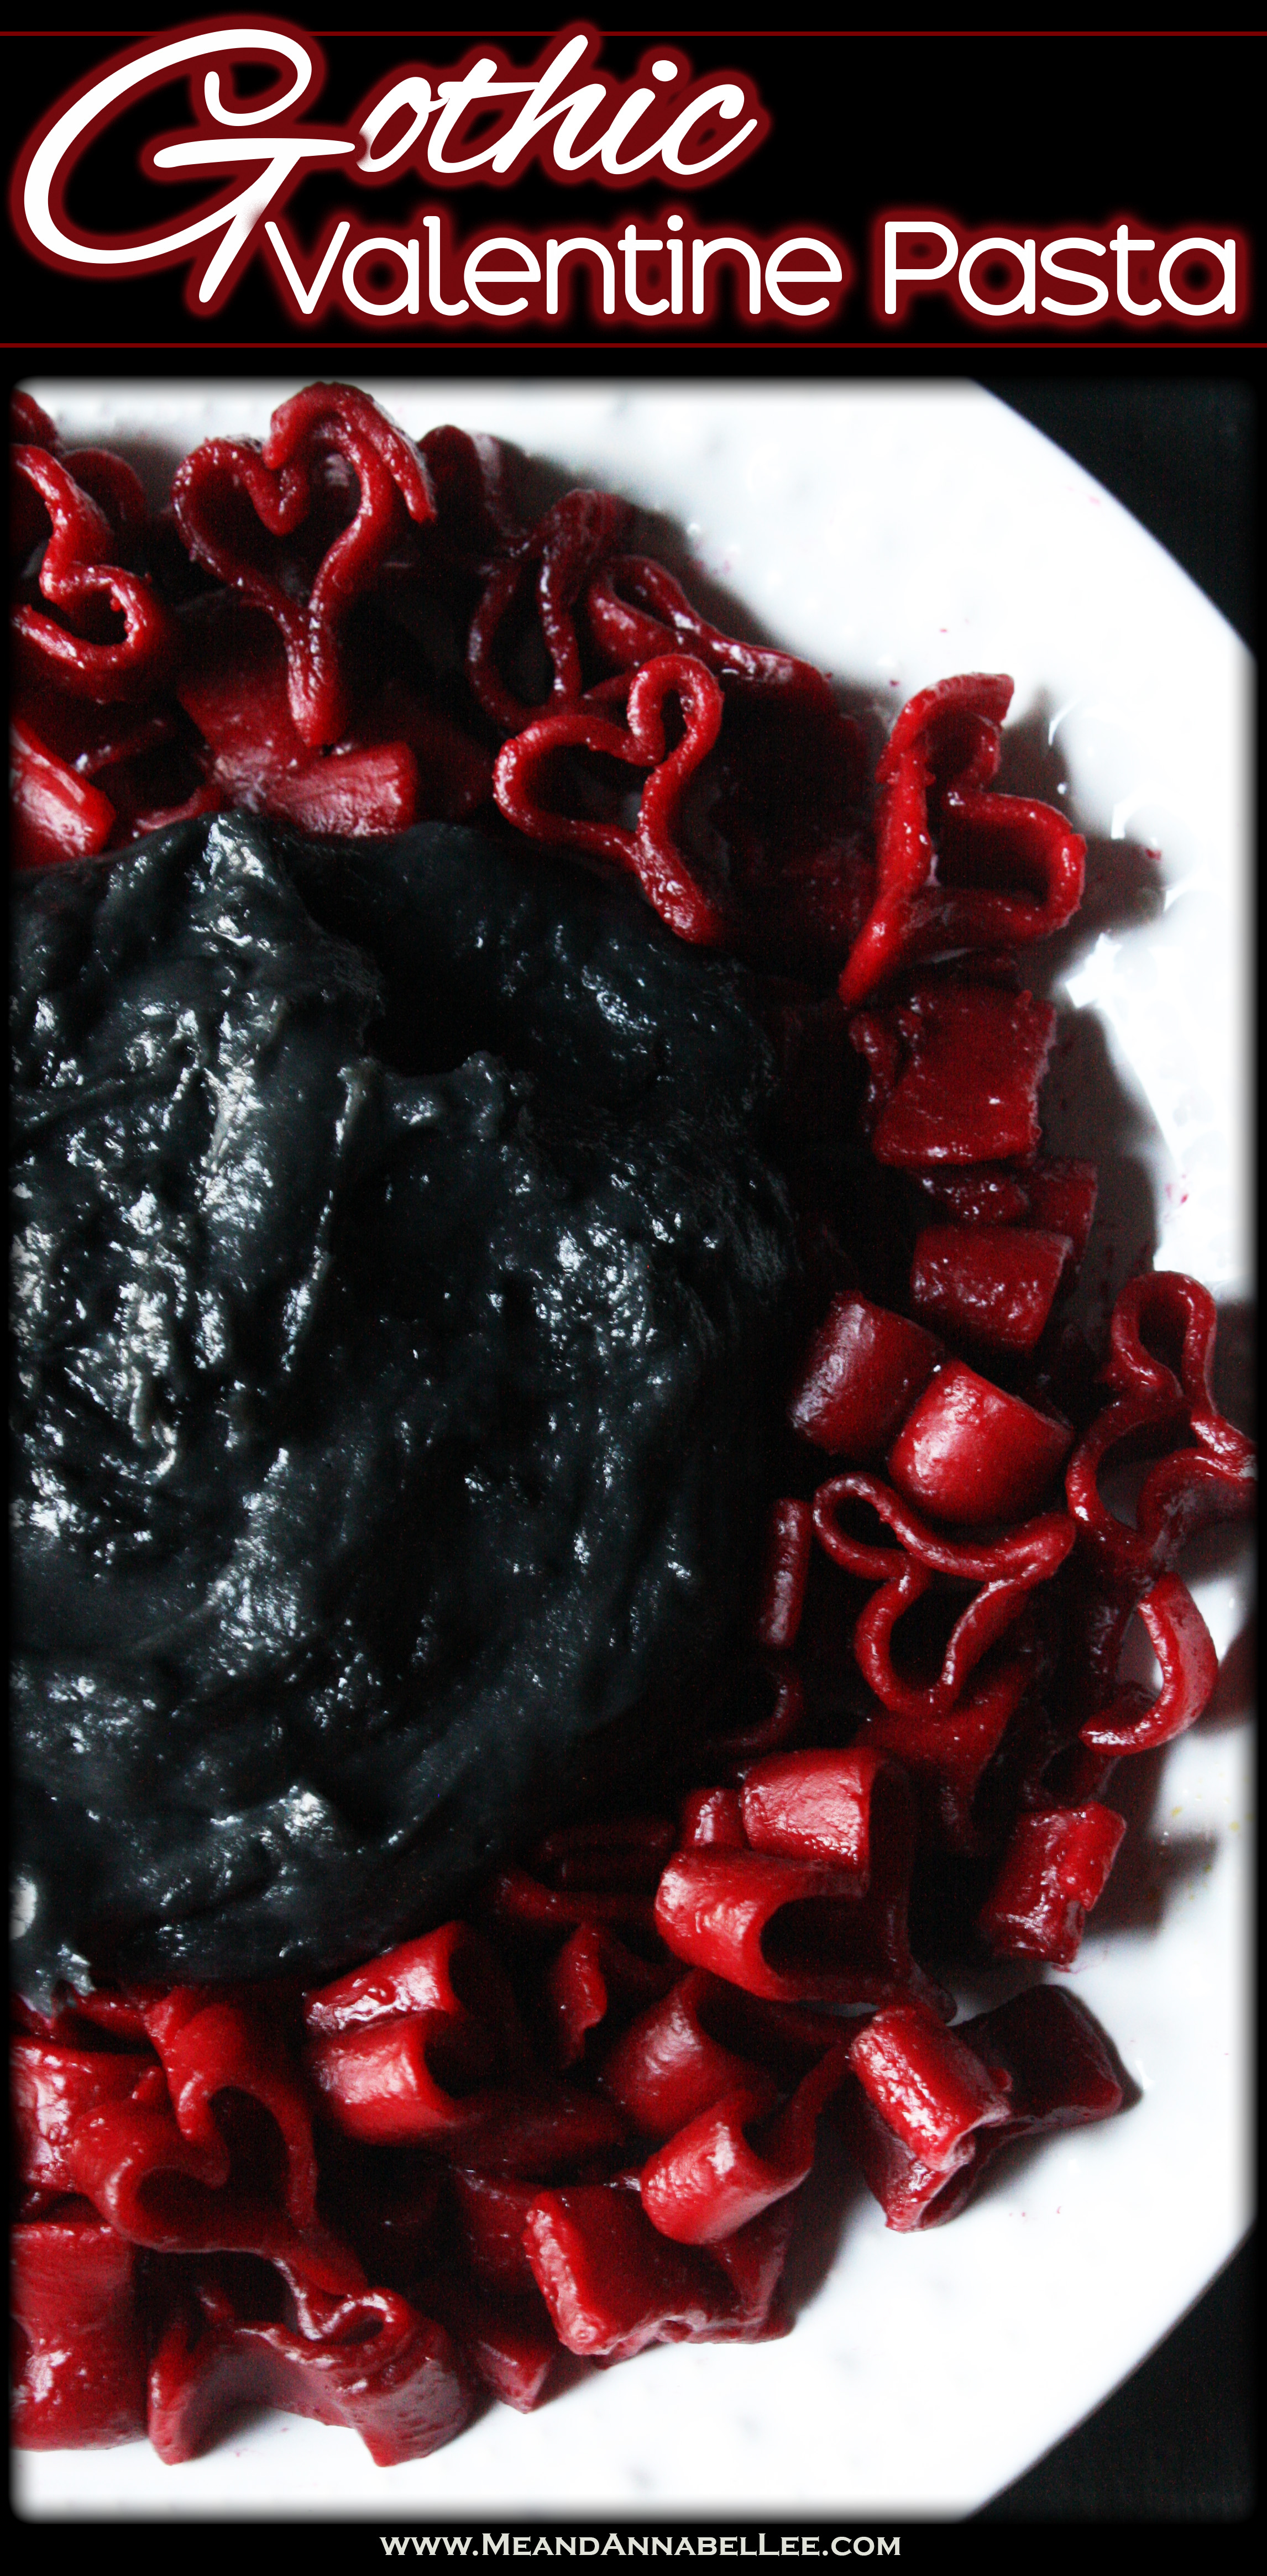 Gothic Valentine Bloody Heart Pasta Dinner | Black Pasta Sauce | How to dye pasta red | Goth Mac & Cheese | Anti Valentine | Horror Food | Red and Black Macaroni and Cheese | Cooking with charcoal | Beet Heart Shaped Pasta | www.MeandAnnabelLee.com